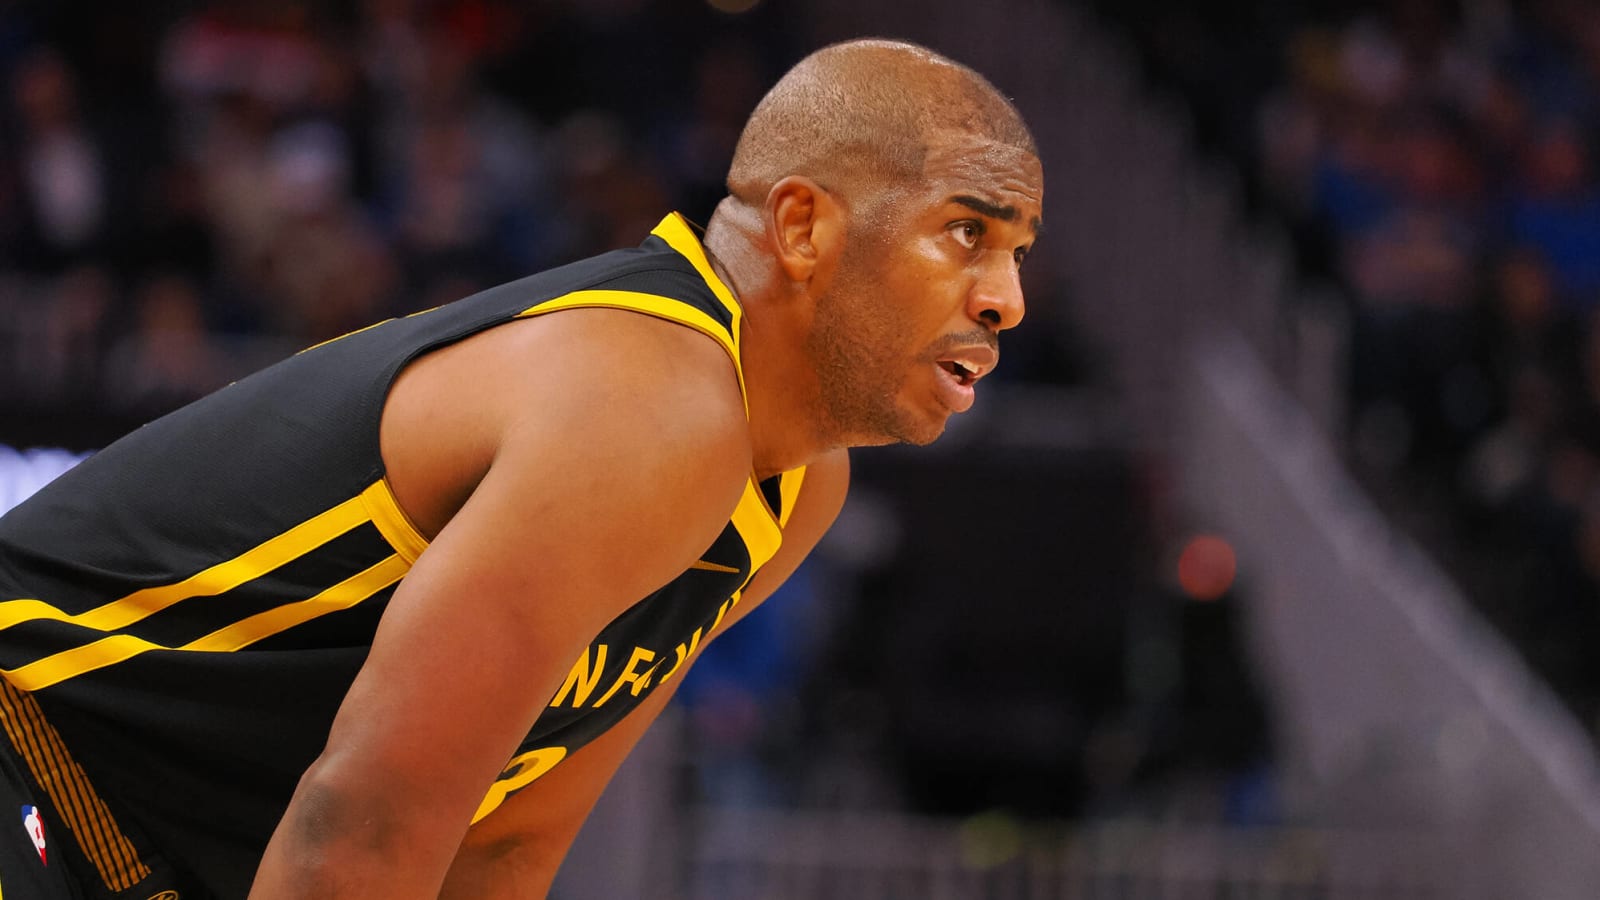 Chris Paul Faces Criticism for Supposedly Dirty Play Against Timberwolves